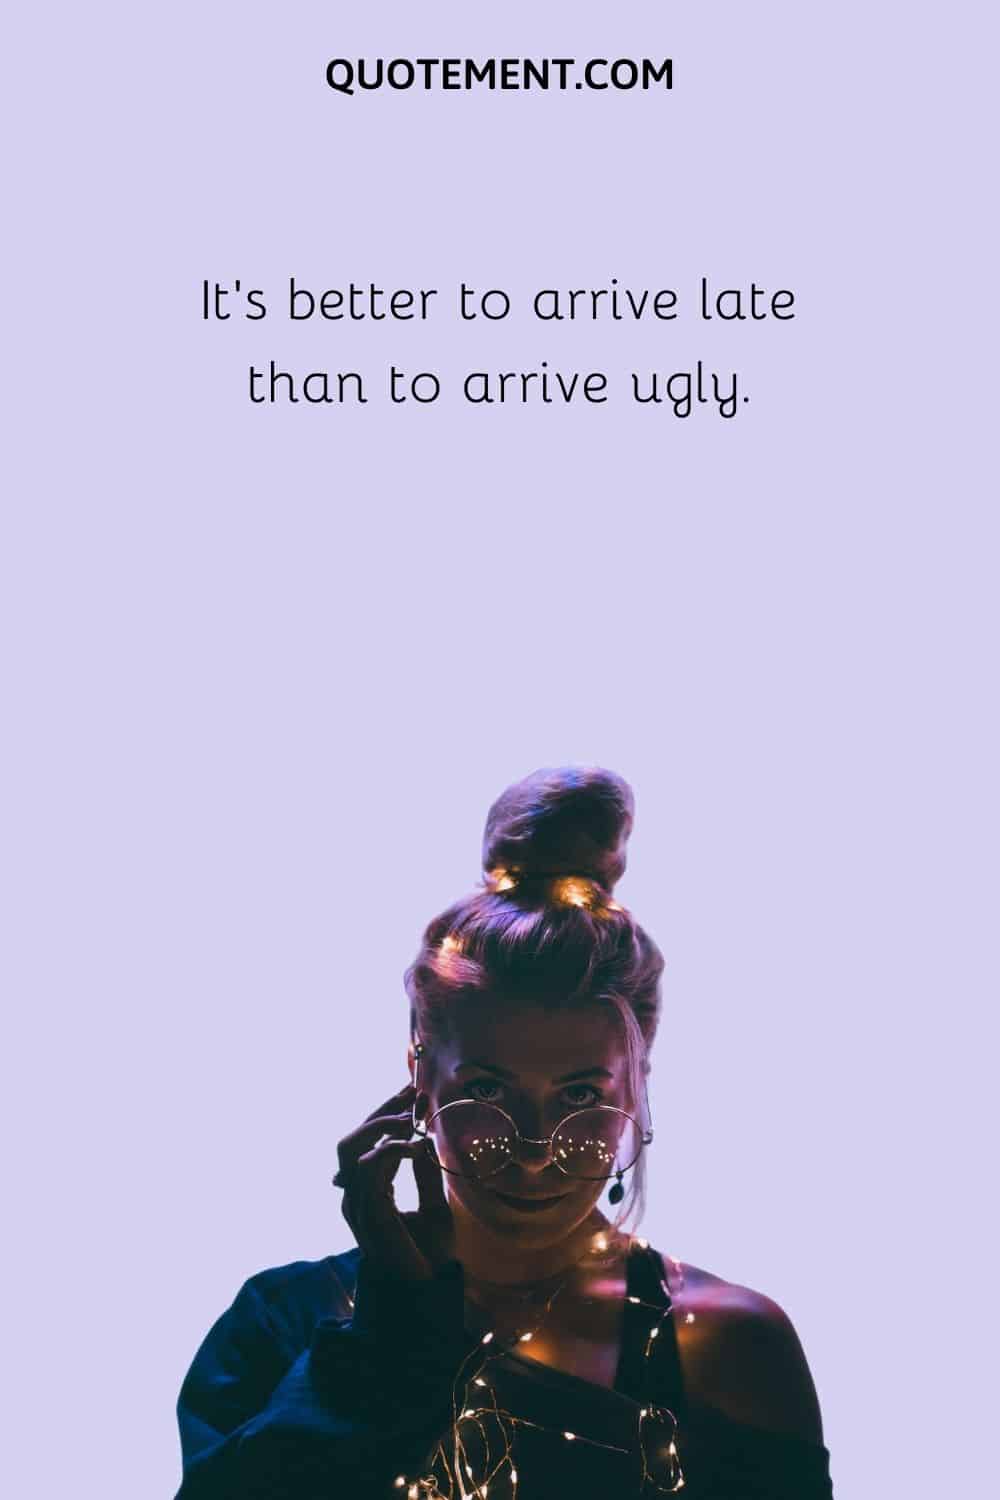 It’s better to arrive late than to arrive ugly